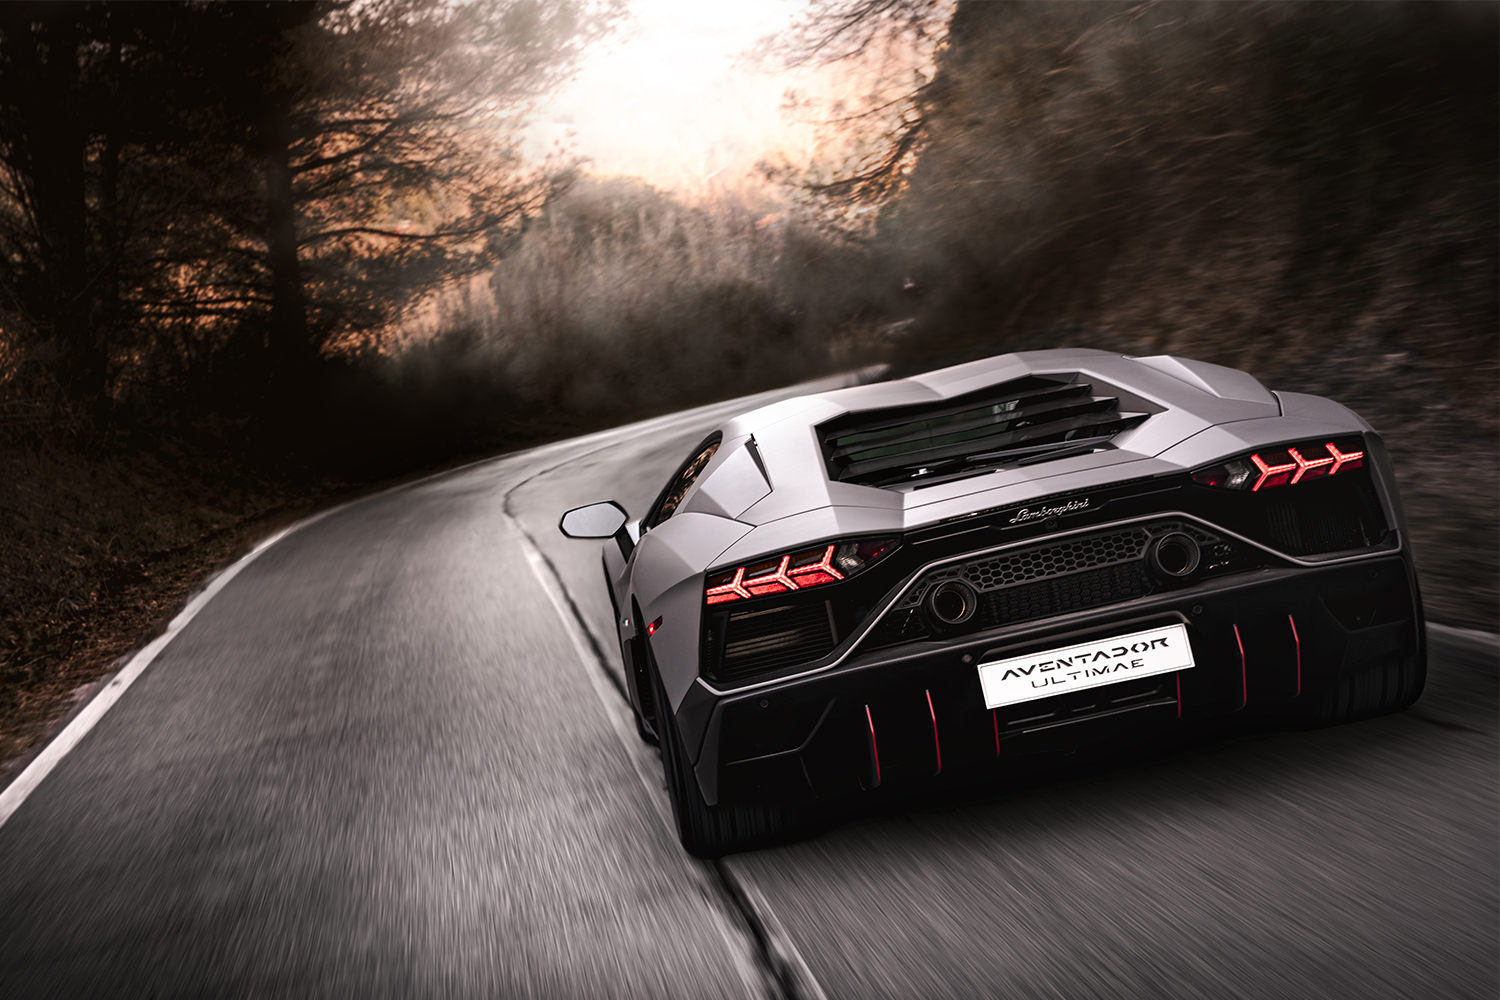 A Lamborghini Aventador Ultimae shown from the rear driving down a road at dusk